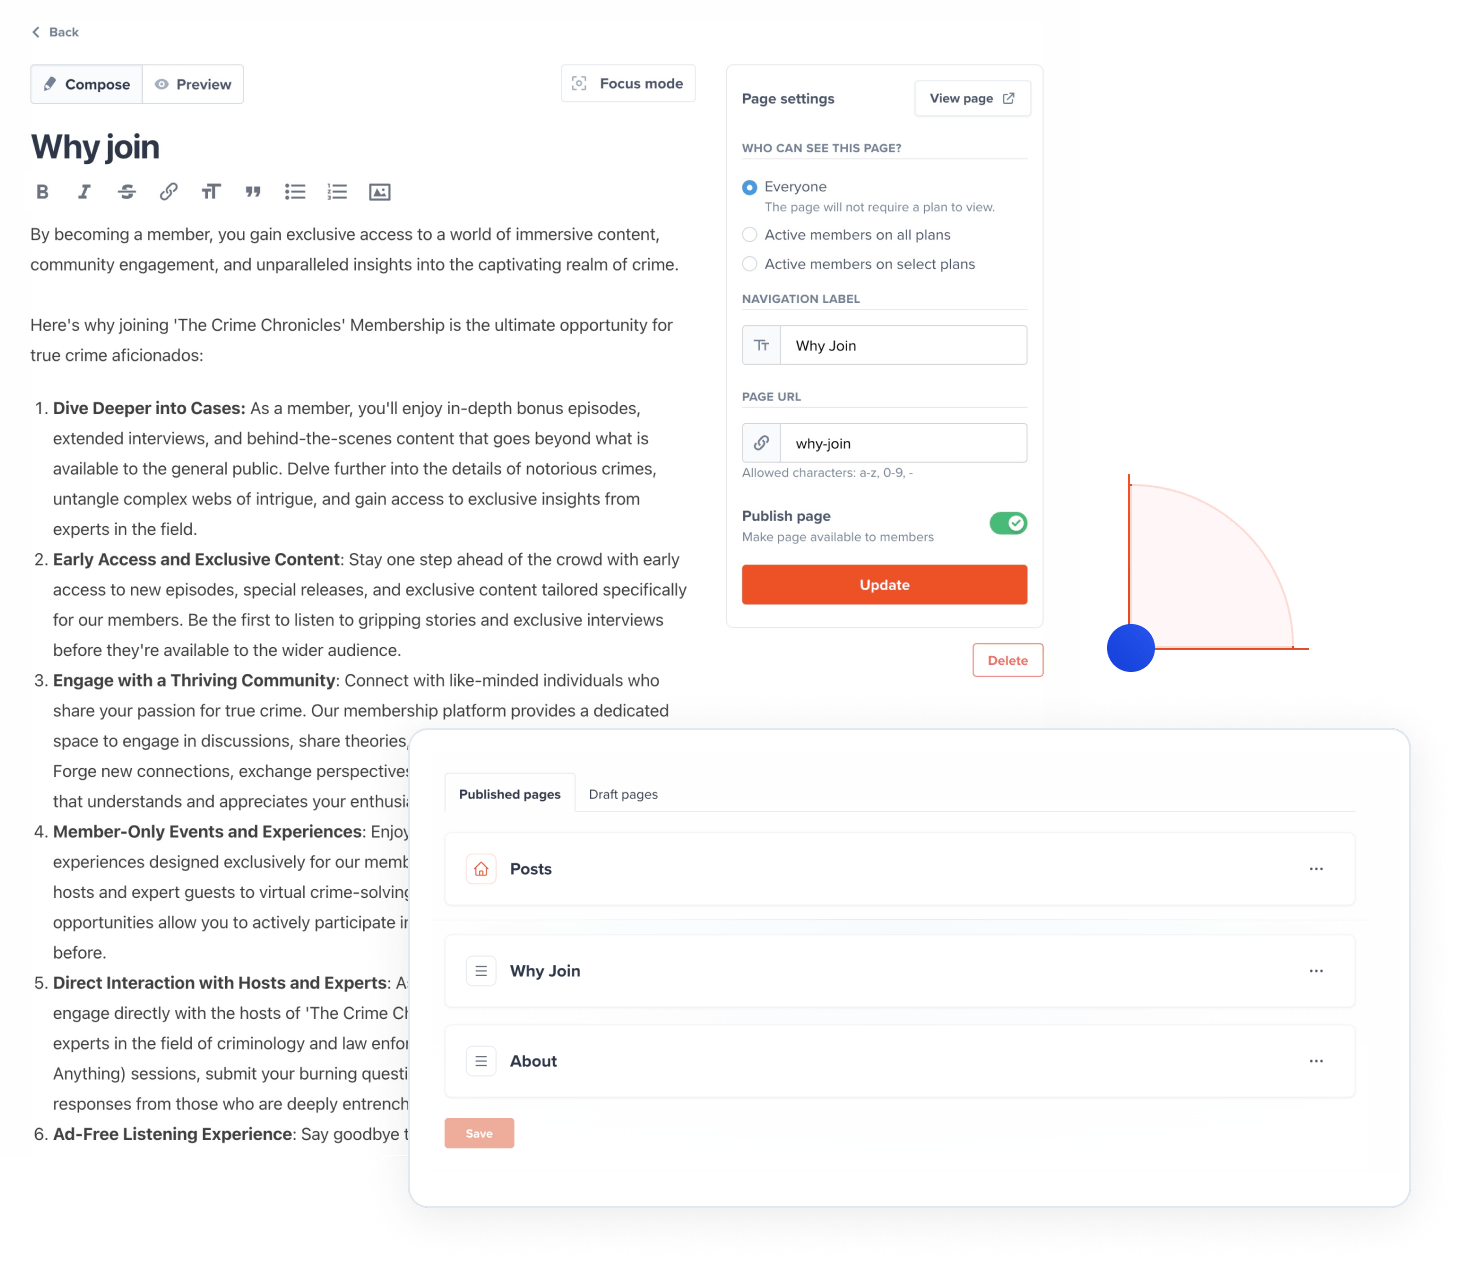 Memberful's content and page editor